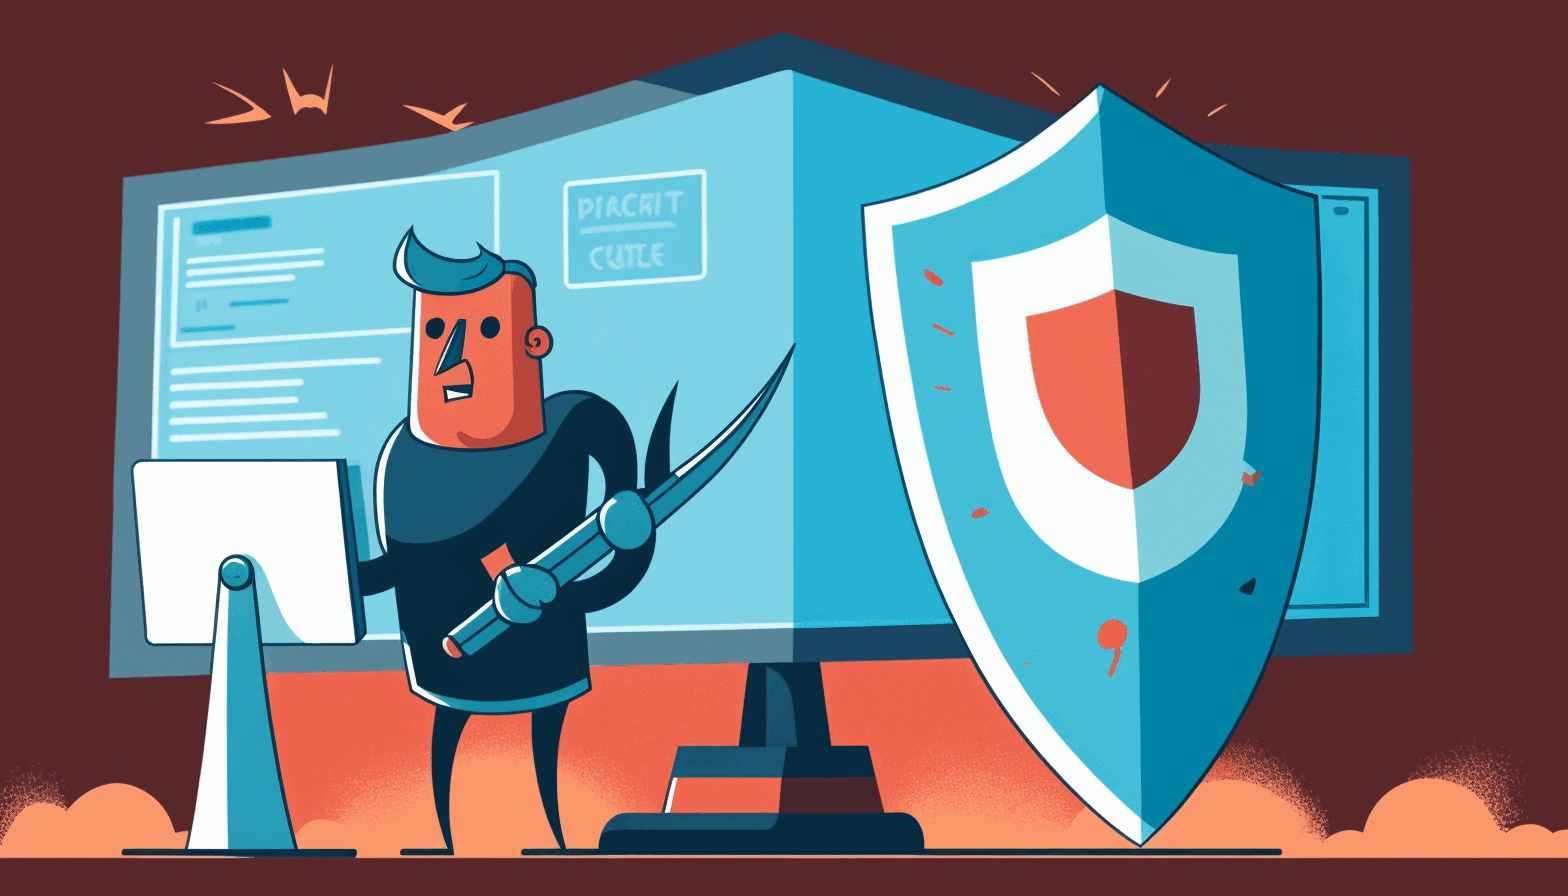 A cartoon style image of a person standing with a shield in front of a computer screen, protecting it from various cyber attacks such as malware, viruses, phishing, and hacking attempts.